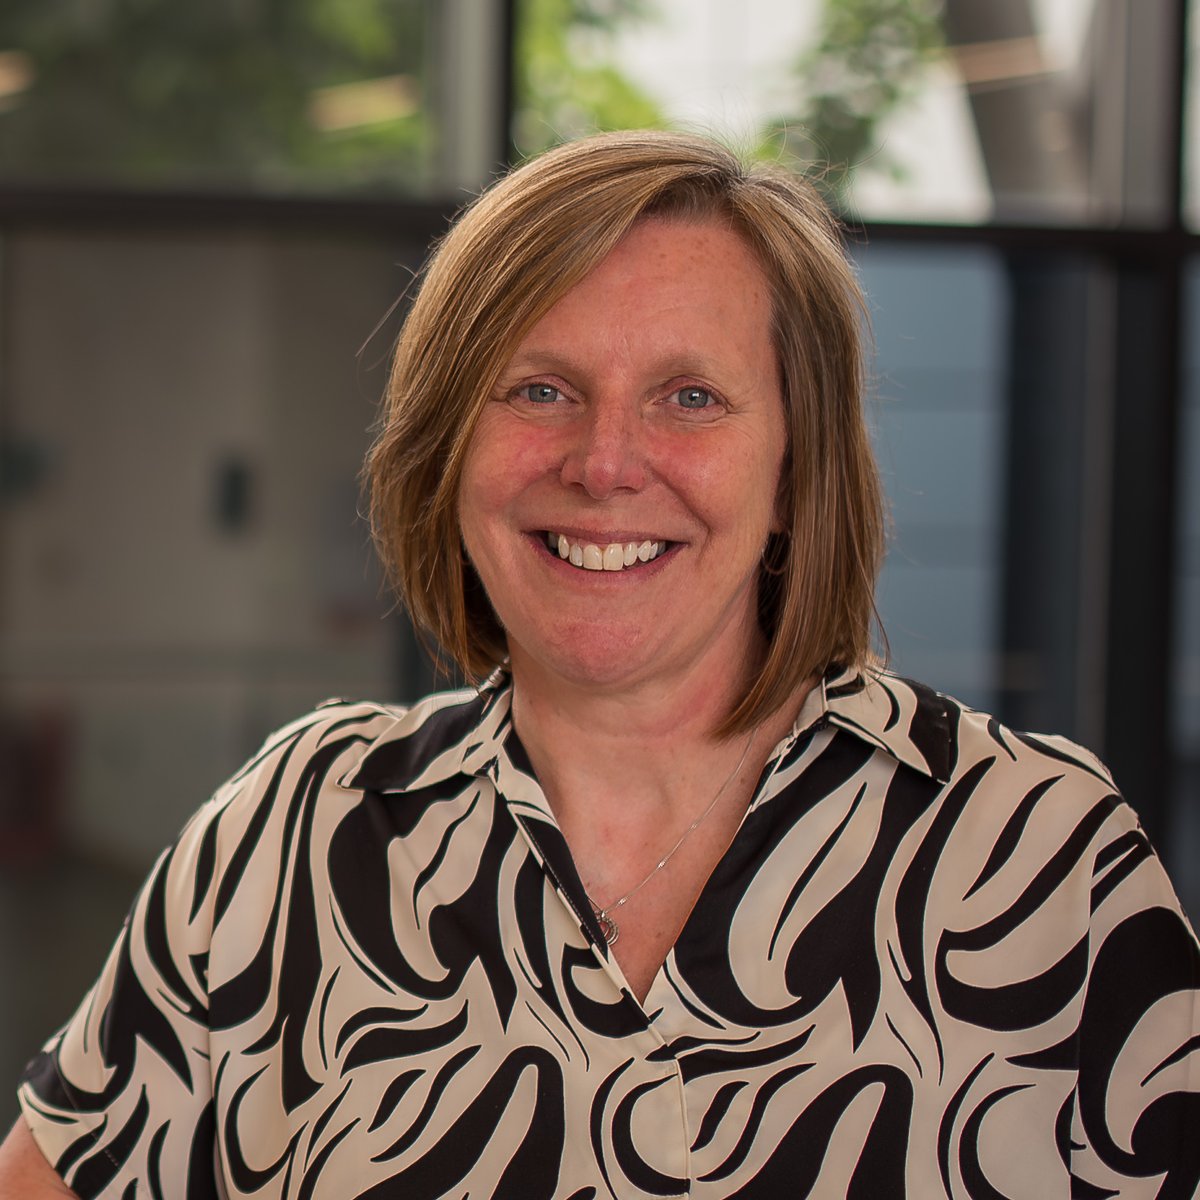 We are delighted to announce that Susan Ambler has been appointed as our Chief Financial Officer (CFO)! 👏 Susan has worked at the University for a number of years, most recently as interim CFO.